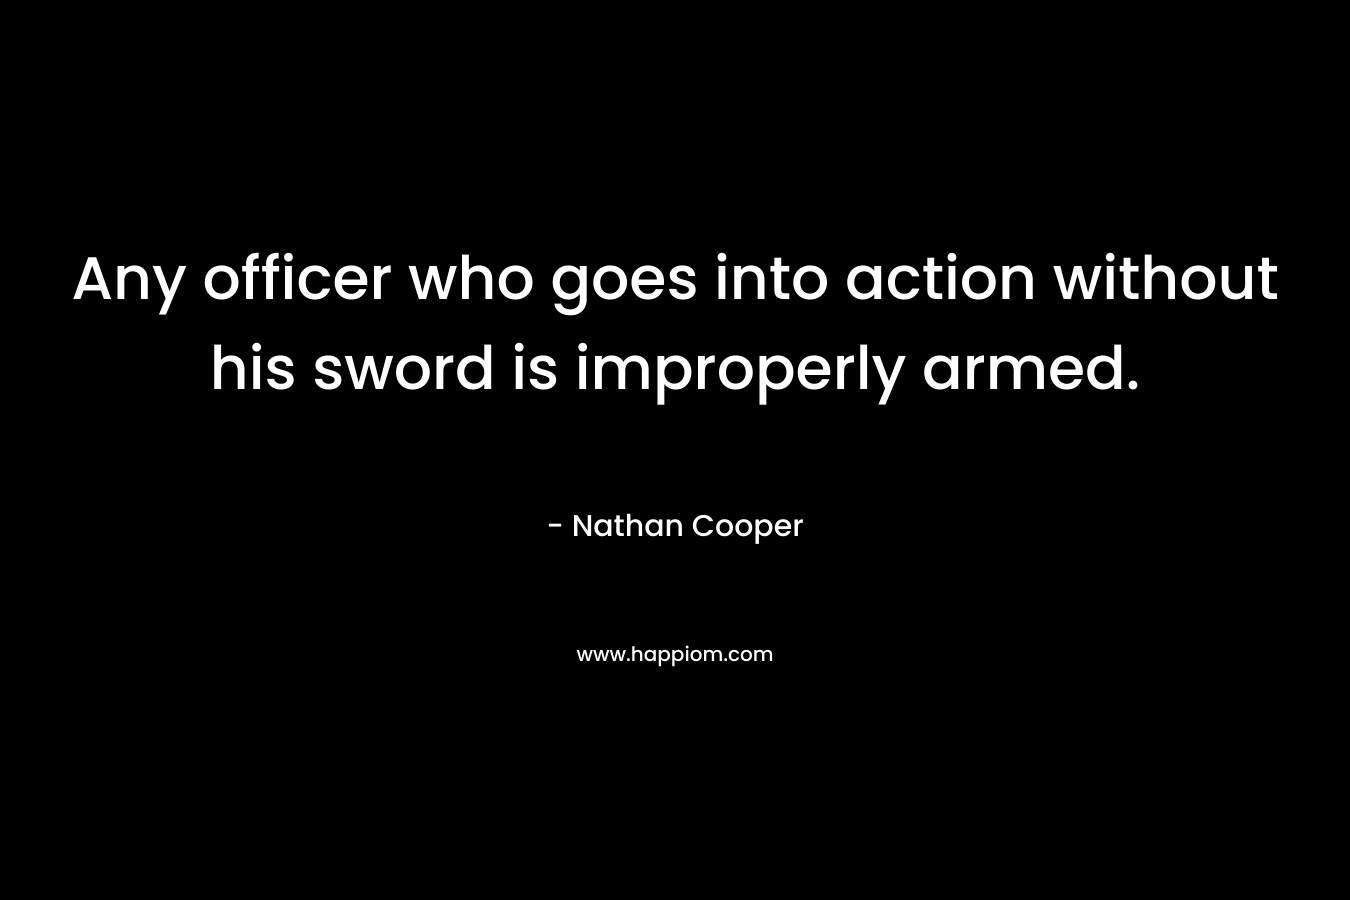 Any officer who goes into action without his sword is improperly armed.